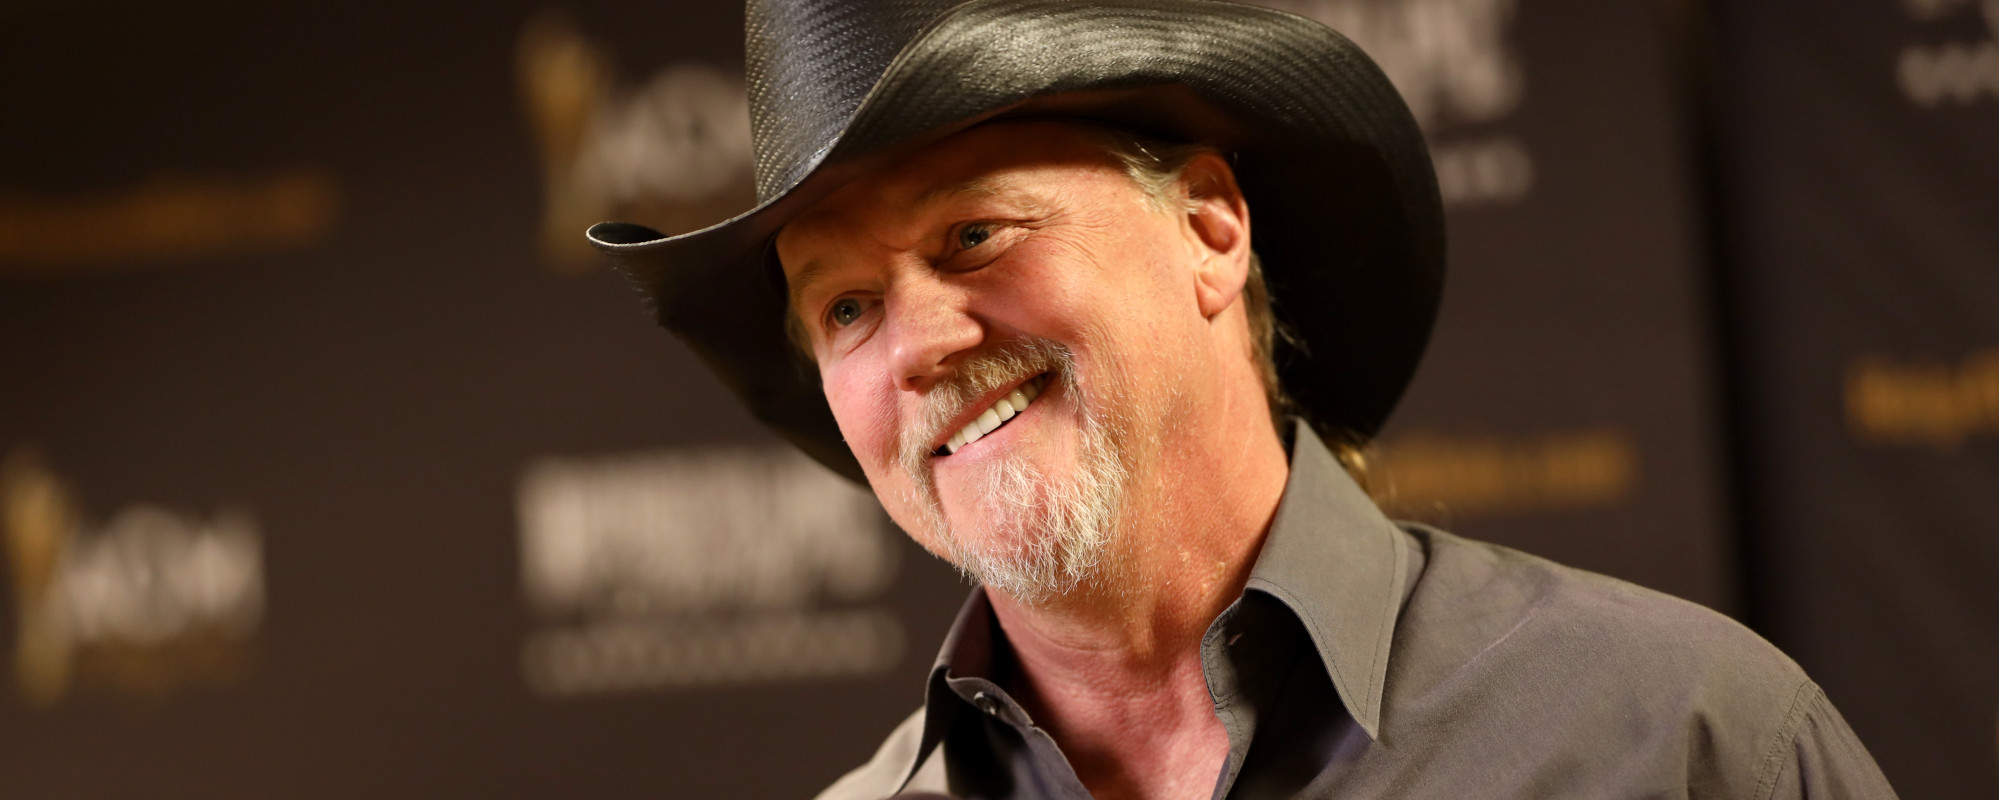 Trace Adkins Defends Jason Aldean and Morgan Wallen from Cancel Culture & “Grievance Junkies”